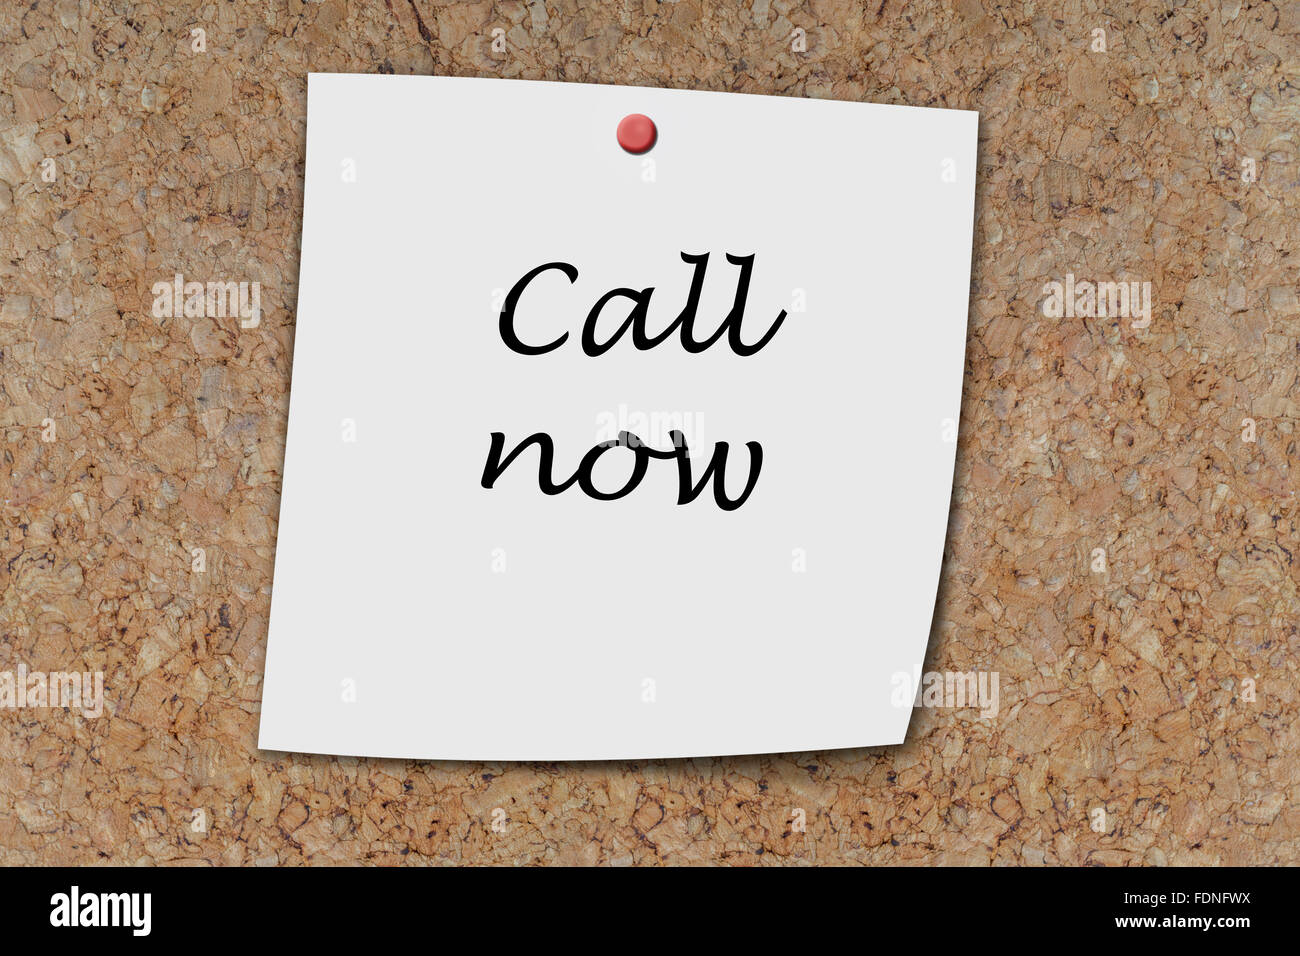 Call Now written on a memo pinned on cork board Stock Photo